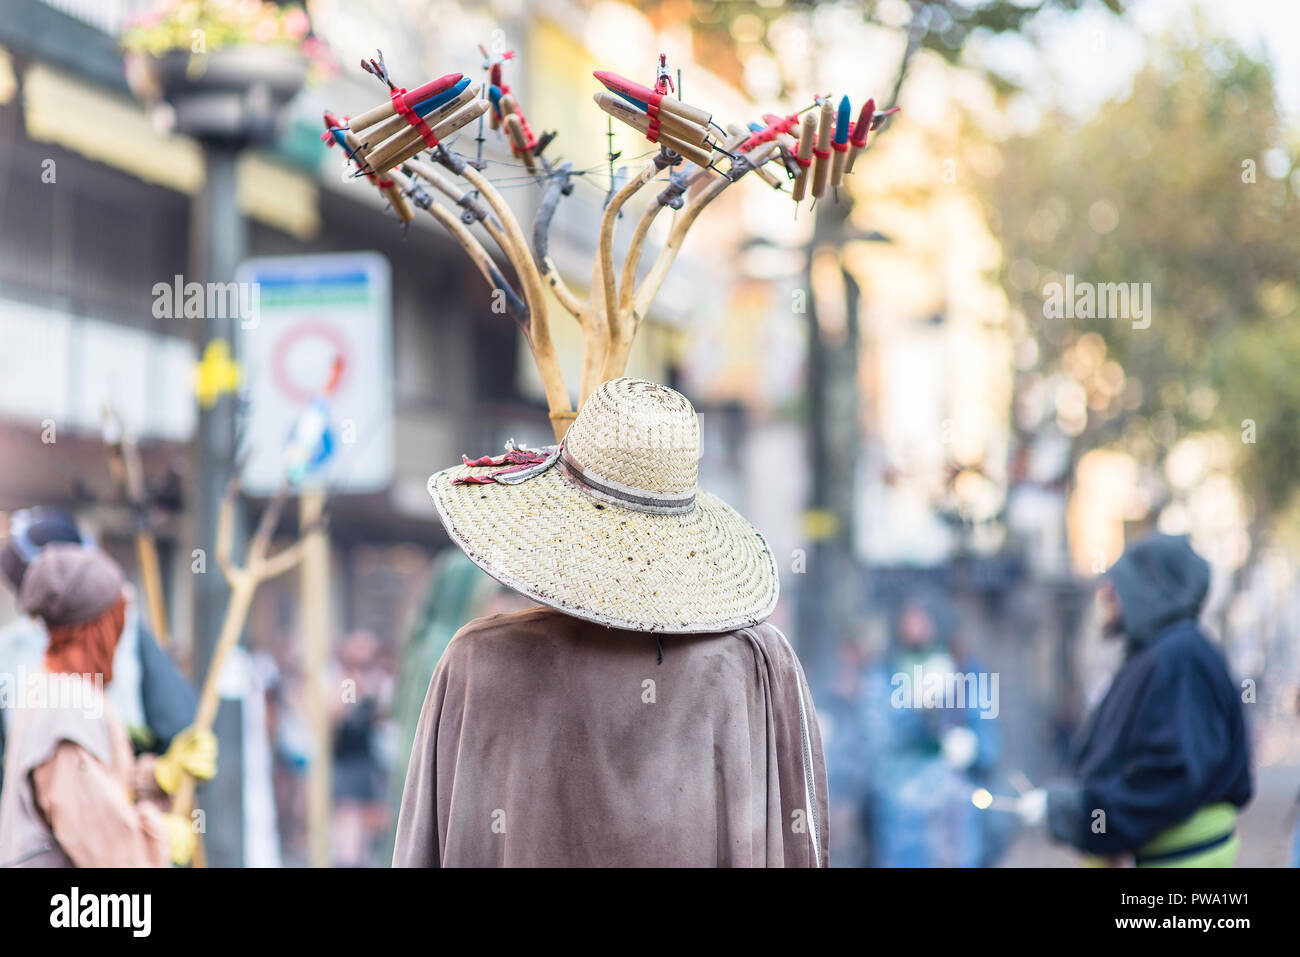 Man with a costume wearing a hat full of firecrackers during the Festa Major in Vilanova I la Geltru'. Barcelona, Catalonia. August 2018 Stock Photo